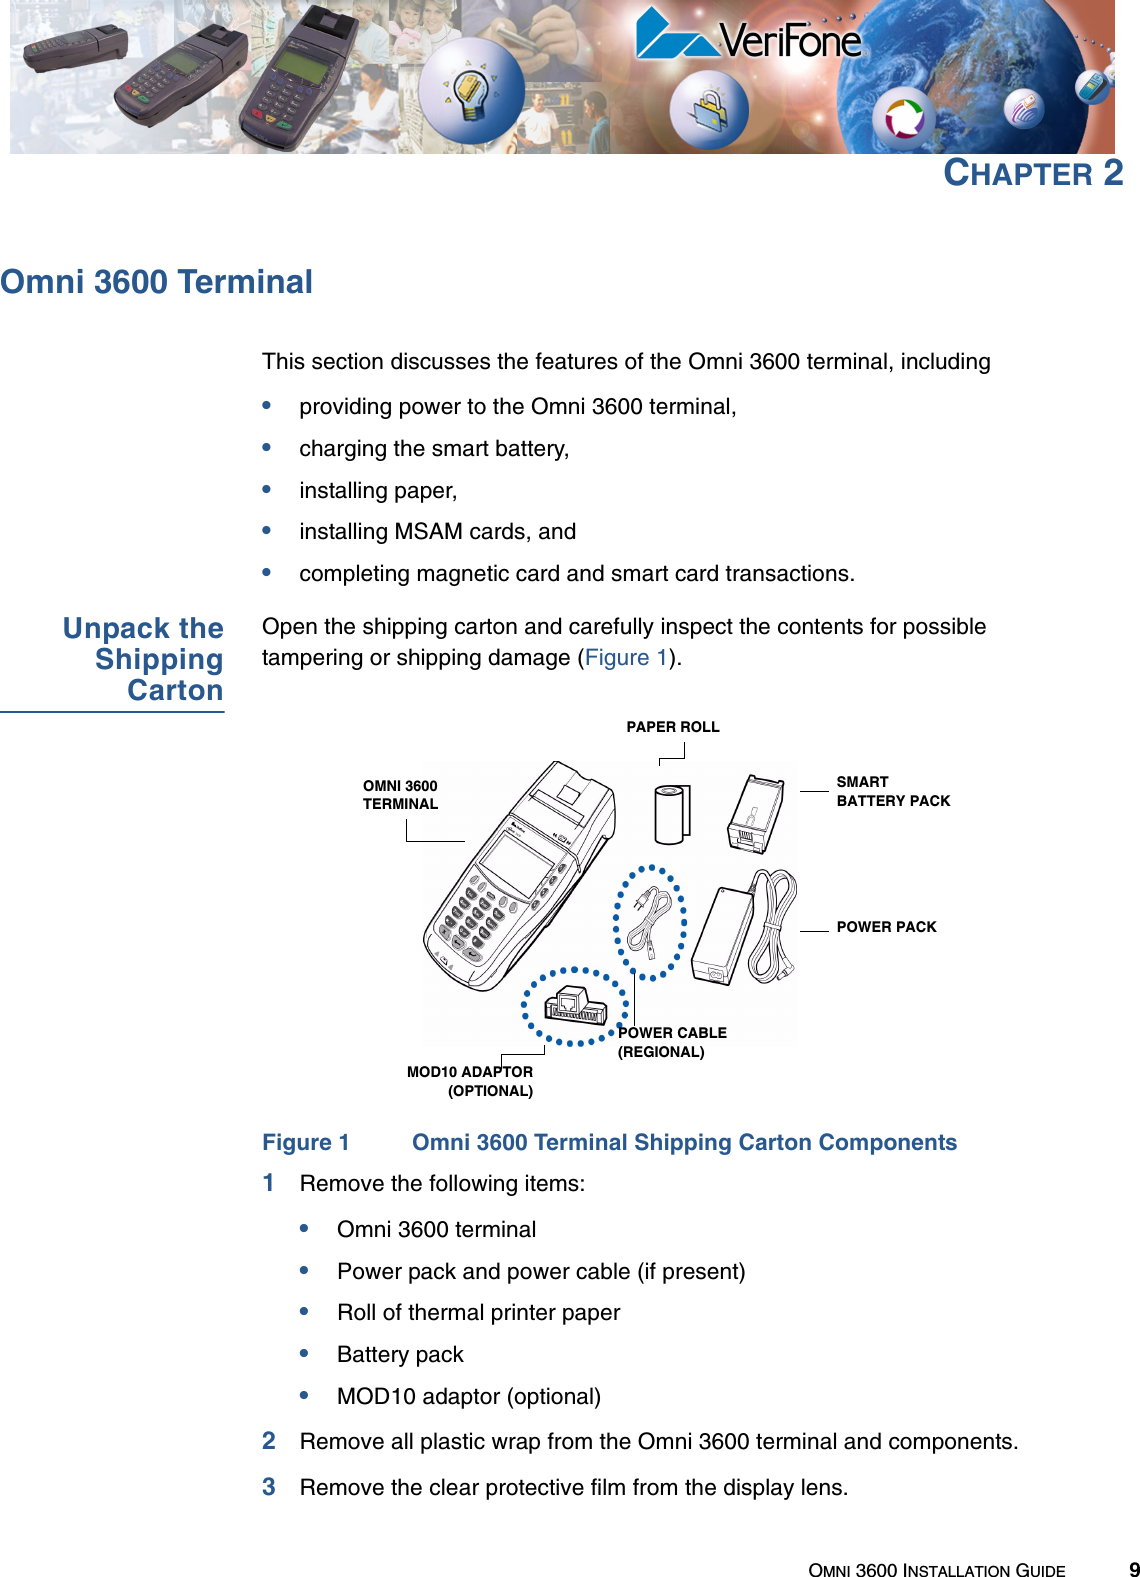 OMNI 3600 INSTALLATION GUIDE 9CHAPTER 2Omni 3600 TerminalThis section discusses the features of the Omni 3600 terminal, including•providing power to the Omni 3600 terminal,•charging the smart battery,•installing paper,•installing MSAM cards, and•completing magnetic card and smart card transactions.Unpack theShippingCartonOpen the shipping carton and carefully inspect the contents for possible tampering or shipping damage (Figure 1).Figure 1 Omni 3600 Terminal Shipping Carton Components1Remove the following items:•Omni 3600 terminal•Power pack and power cable (if present)•Roll of thermal printer paper•Battery pack•MOD10 adaptor (optional)2Remove all plastic wrap from the Omni 3600 terminal and components.3Remove the clear protective film from the display lens.SMARTBATTERY PACKPOWER PACKPAPER ROLLPOWER CABLE (REGIONAL)OMNI 3600 TERMINALMOD10 ADAPTOR(OPTIONAL)